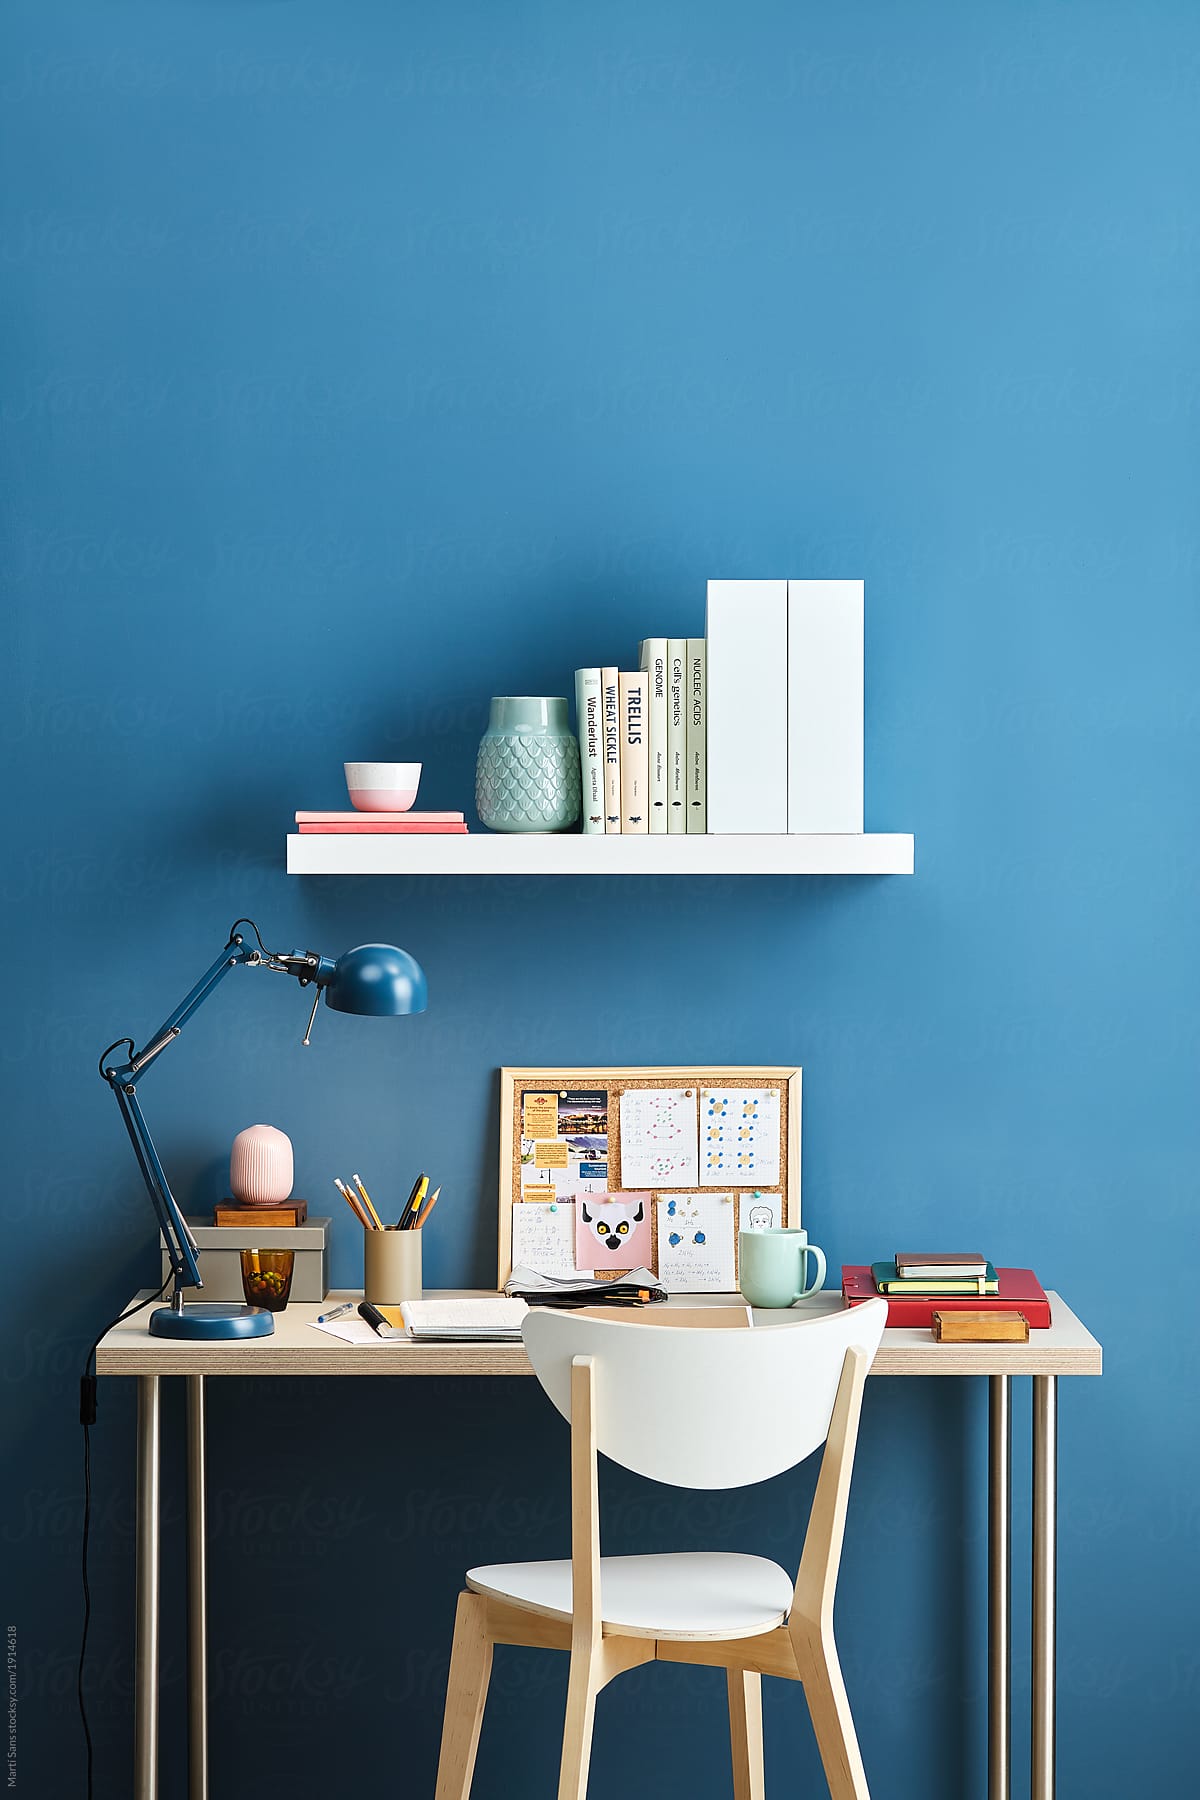 Desktop, chair and shelf over solid blue wall.